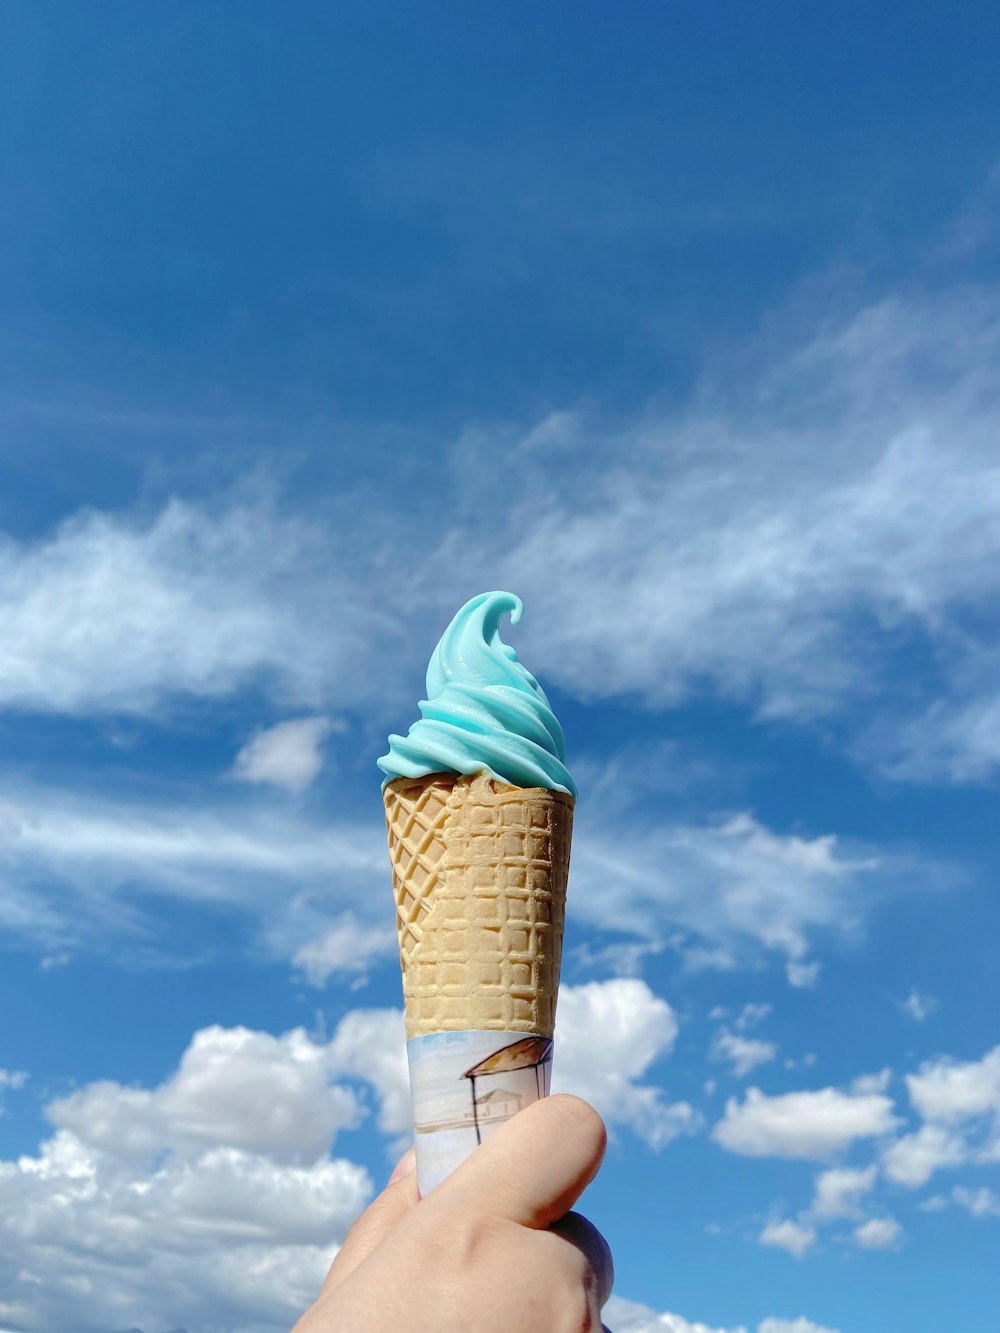 a hand holding an ice cream cone with blue icing